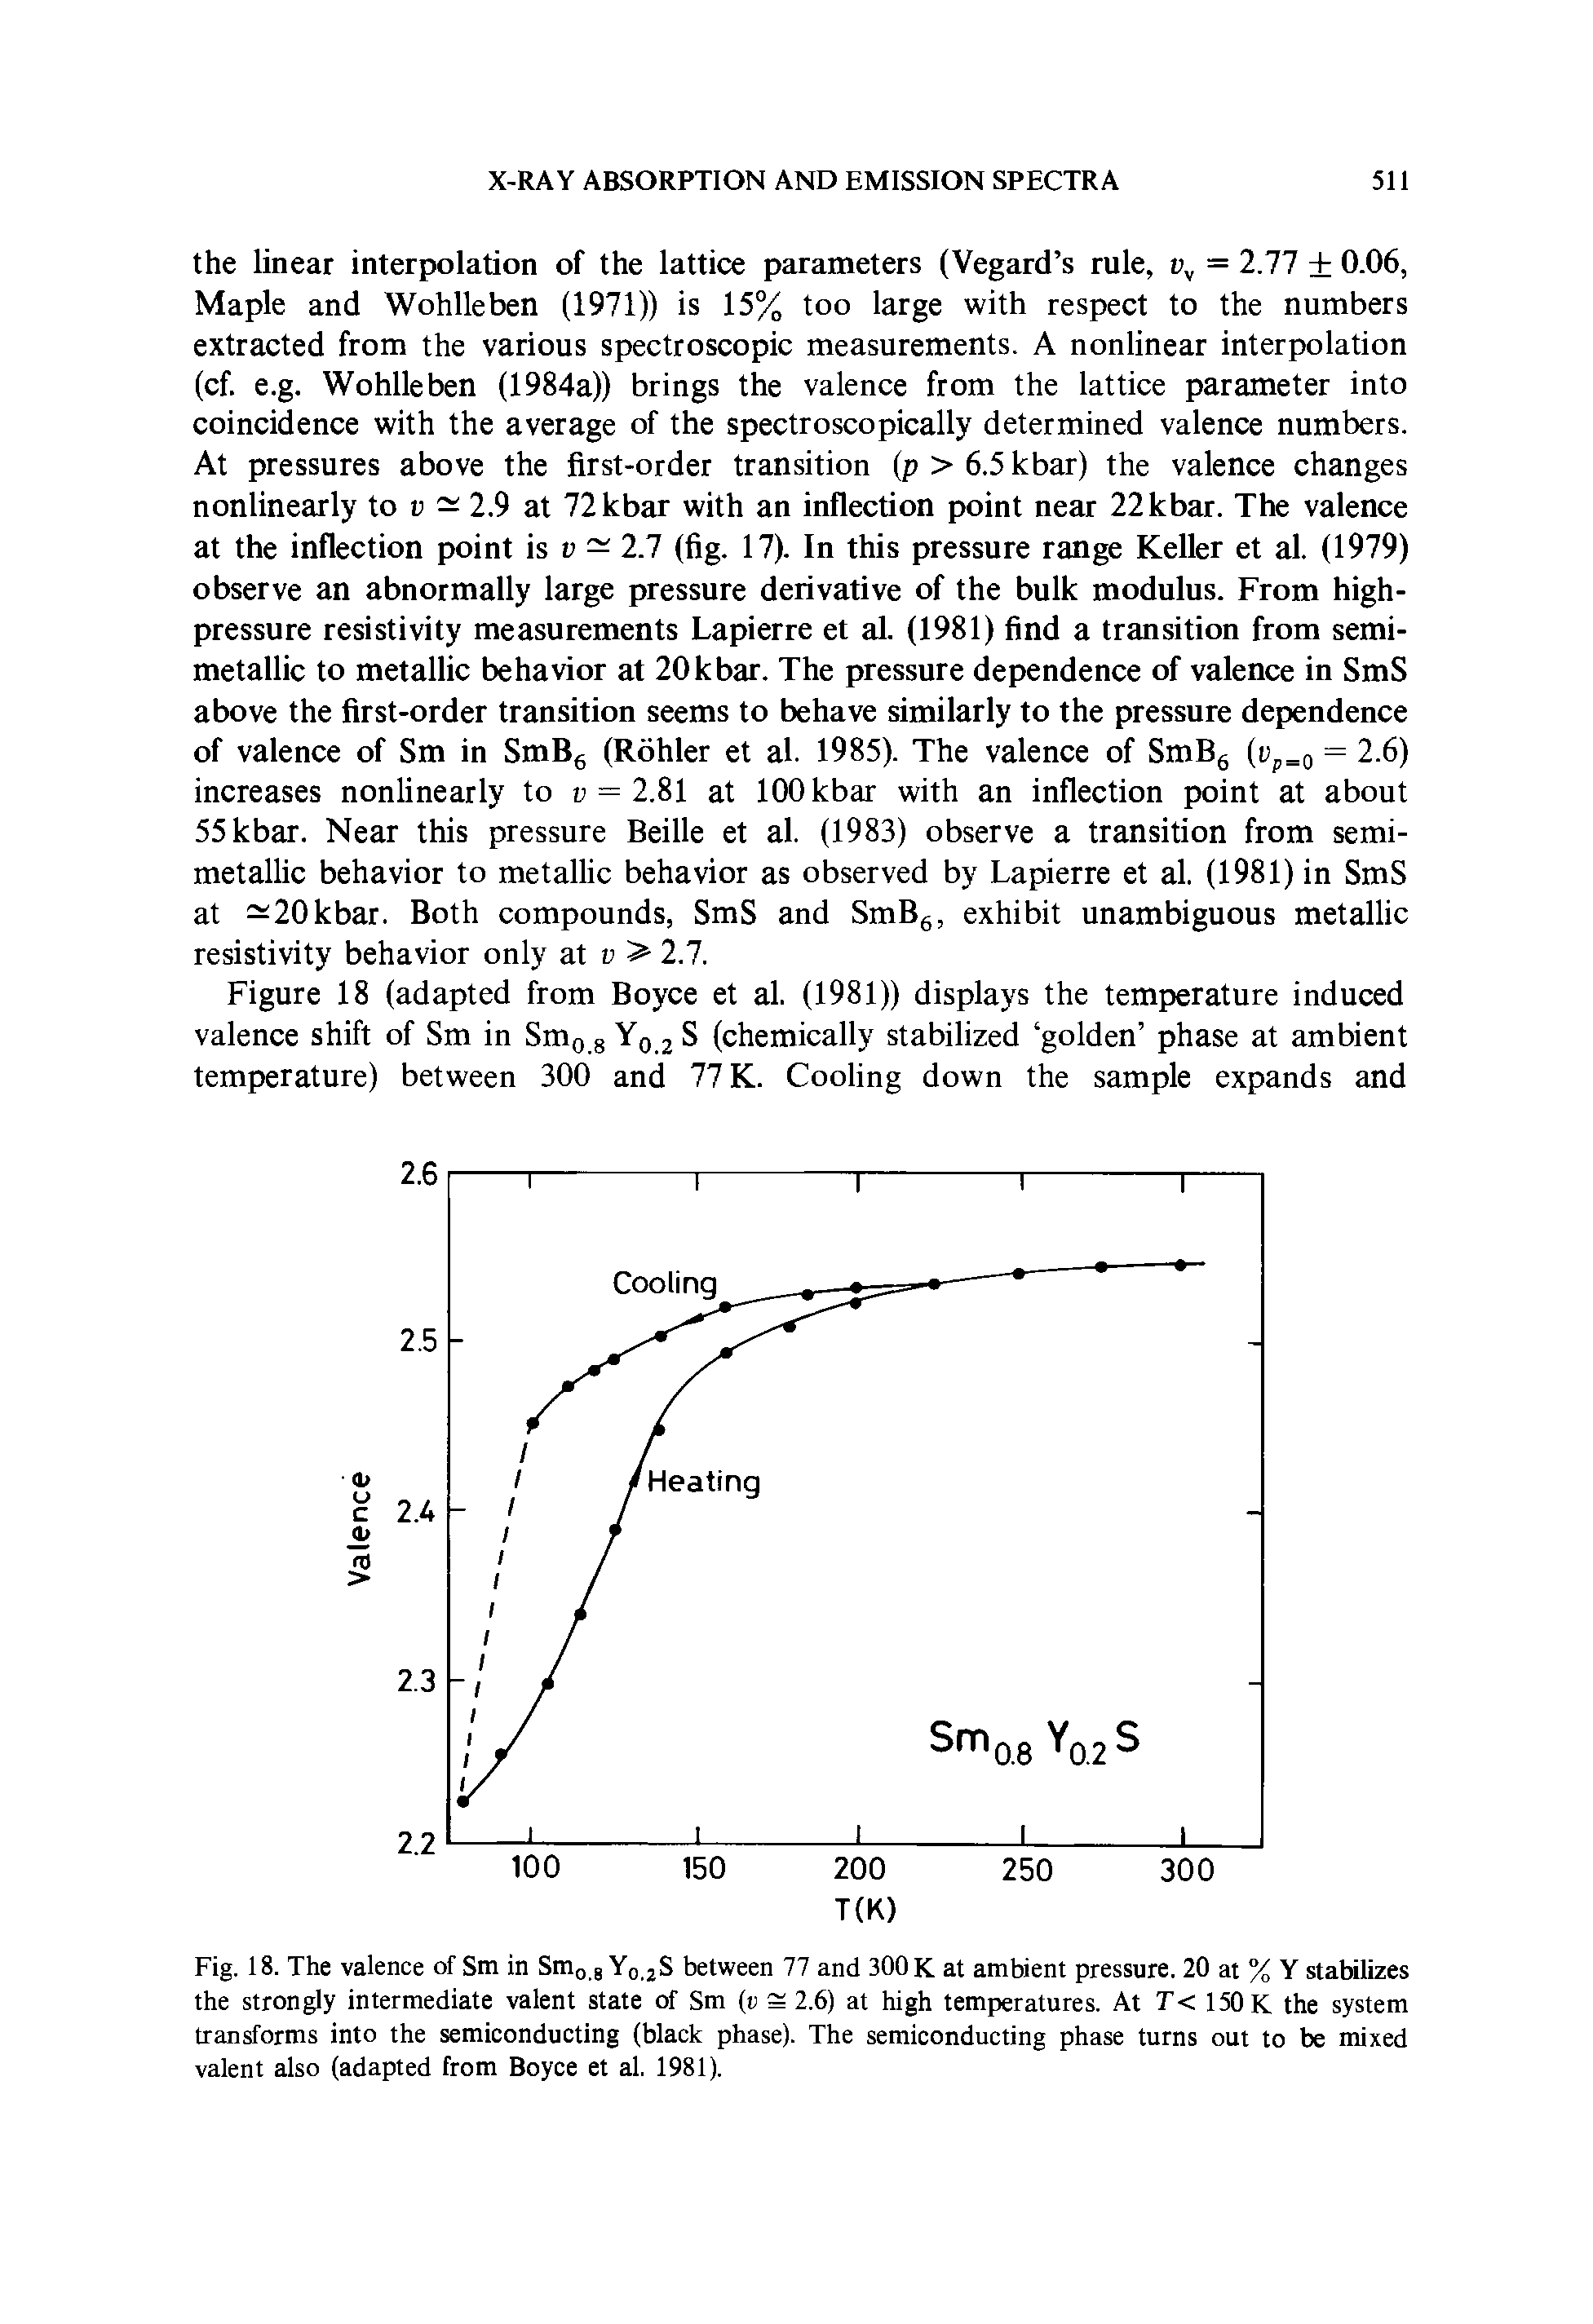 Fig. 18. The valence of Sm in Smo.j Yq,2S between 77 and 300 K at ambient pressure. 20 at % Y stabilizes the strongly intermediate valent state of Sm (1 2.6) at high temperatures. At T< 150 K the system transforms into the semiconducting (black phase). The semiconducting phase turns out to be mixed valent also (adapted from Boyce et al. 1981).